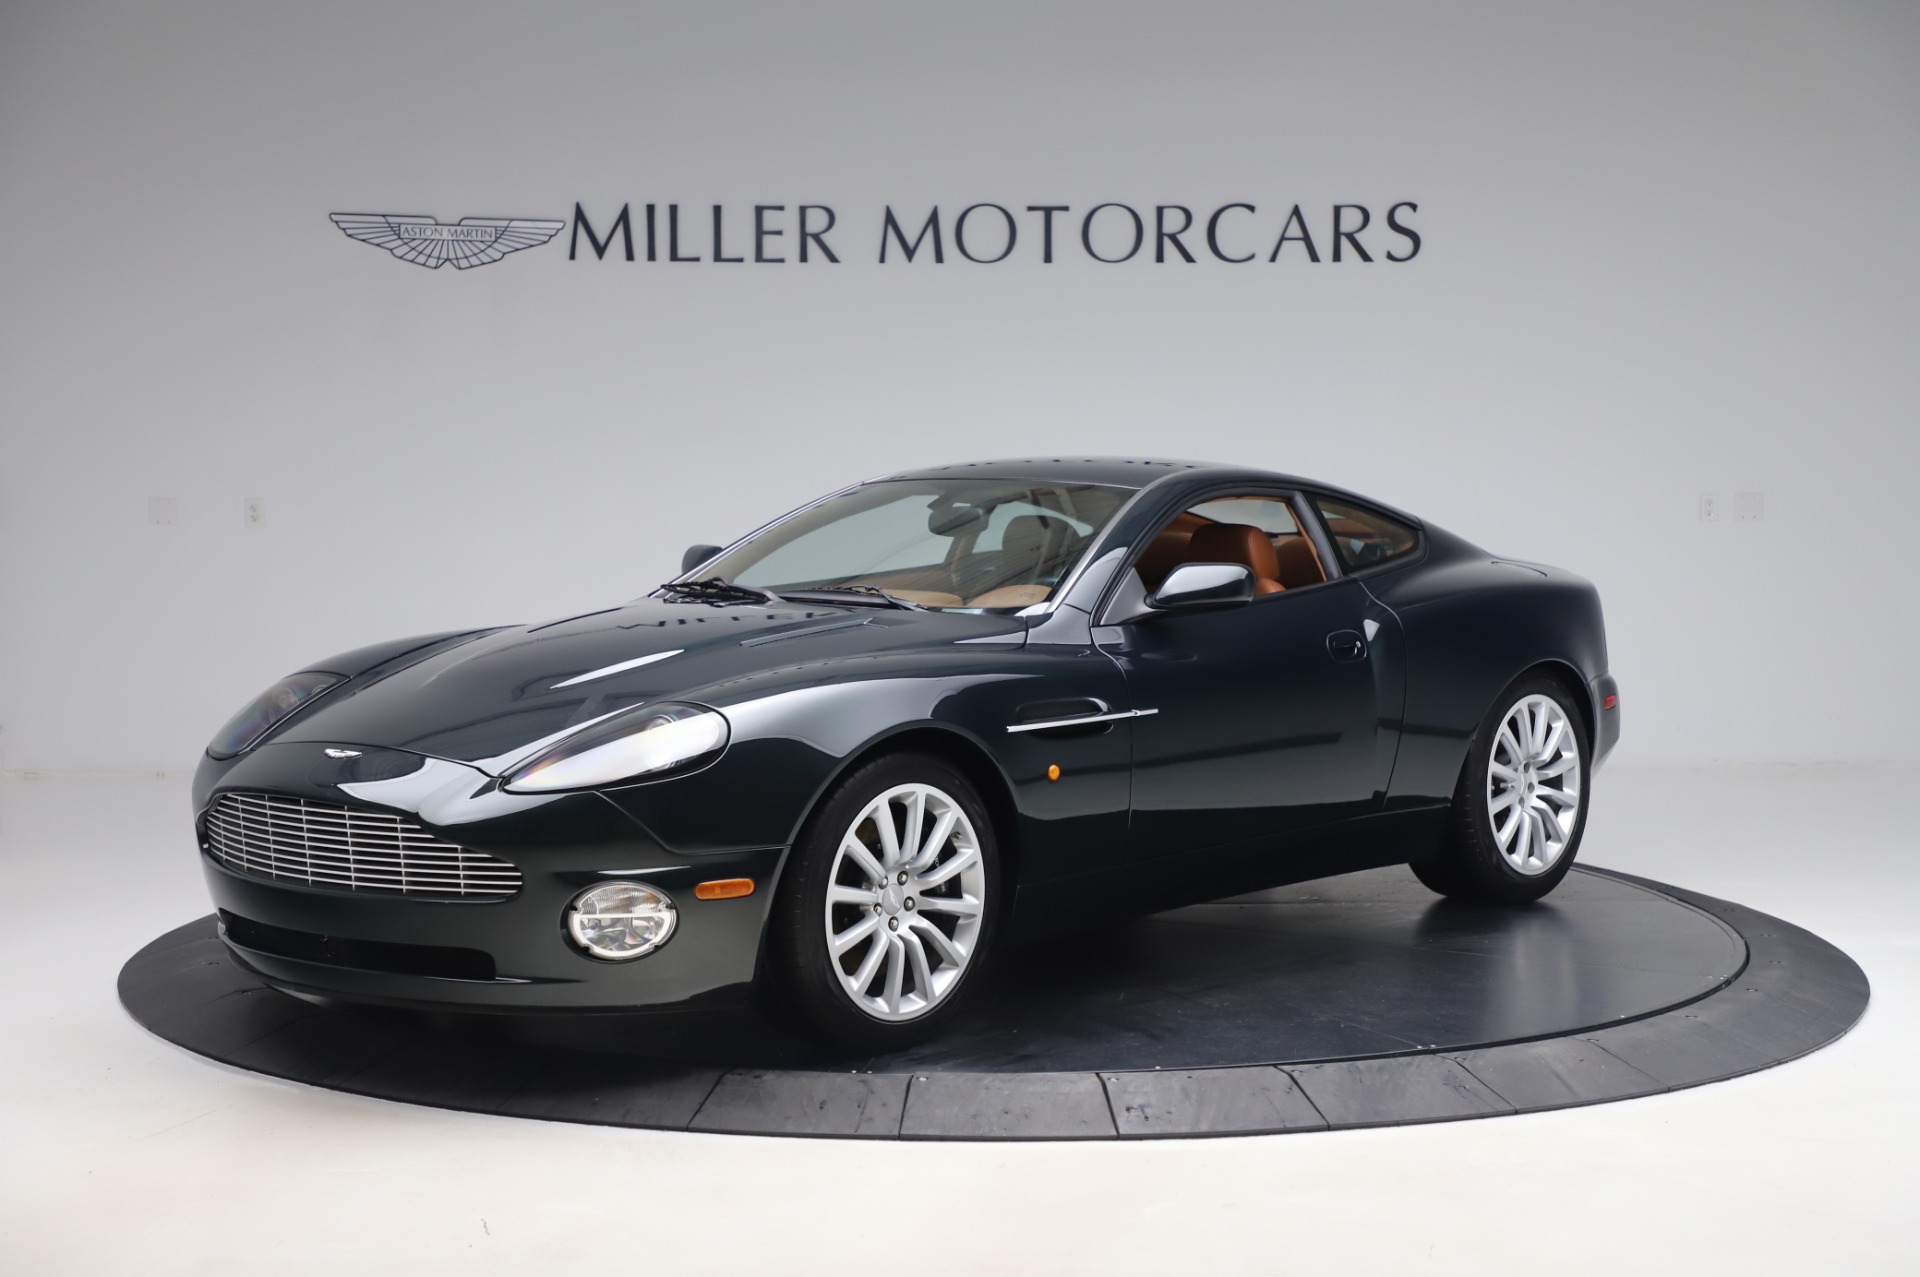 Used 2003 Aston Martin V12 Vanquish Coupe for sale $99,900 at Aston Martin of Greenwich in Greenwich CT 06830 1